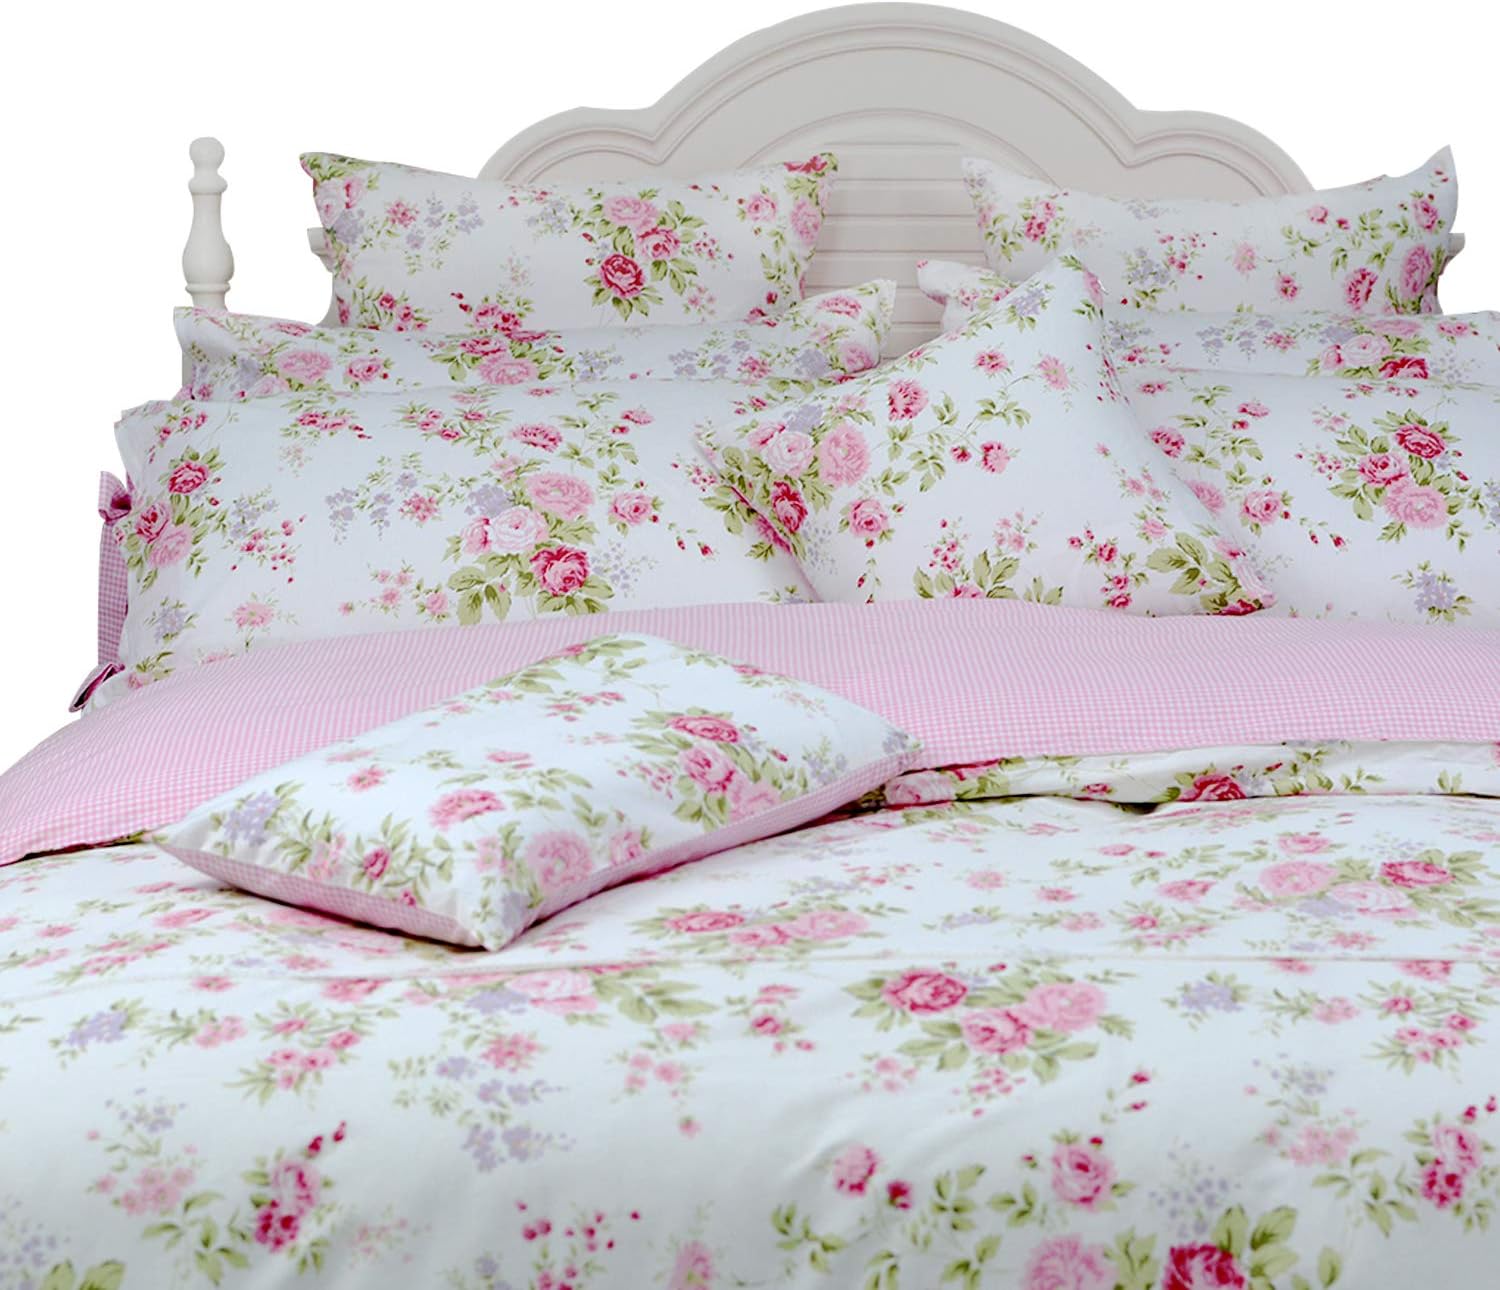 FADFAY Rose Floral Duvet Cover Set Pink Grid Cotton Girls Bedding with Hidden Zipper Closure 3 Pieces, 1duvet Cover & 2pillowcases,Twin Size